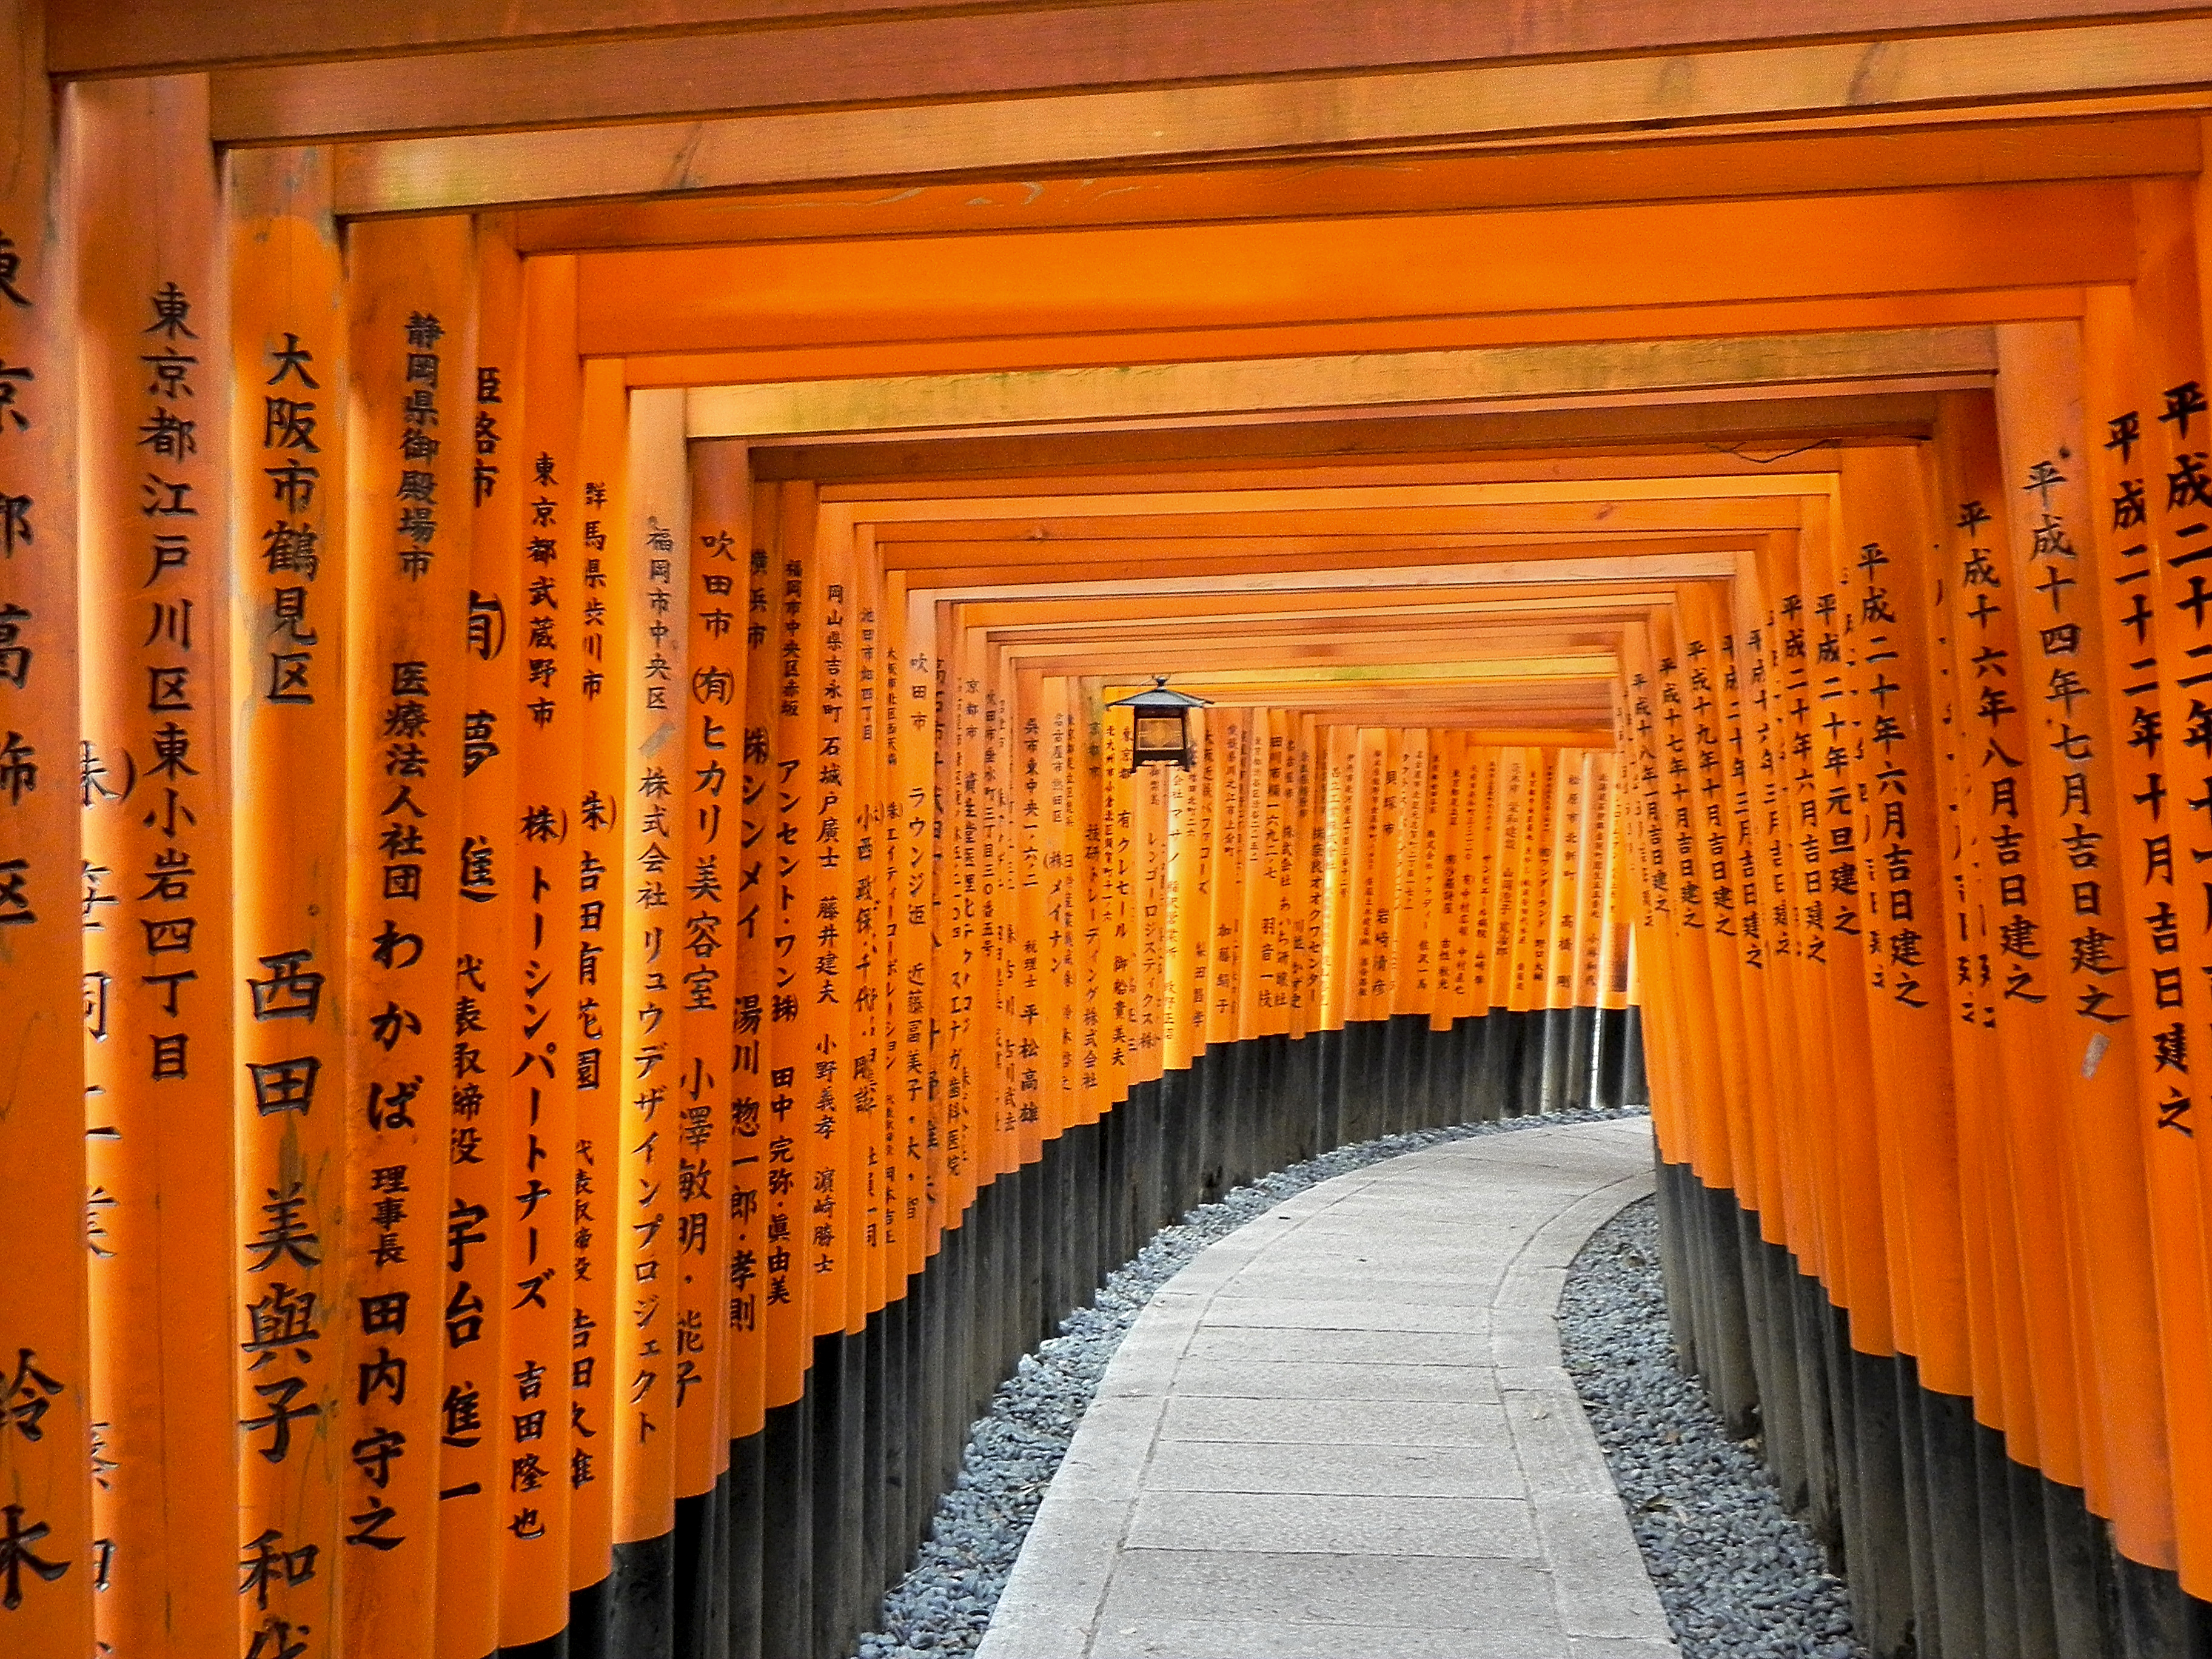 Learn about Japanese language and culture when you study abroad in Japan with The Experiment. Develop your skills through Japanese language immersion, exploring vibrant Tokyo neighborhoods, and living with a Japanese homestay family.  Torii Gates at Fushimi Inari Shrine in Kyoto, Japan